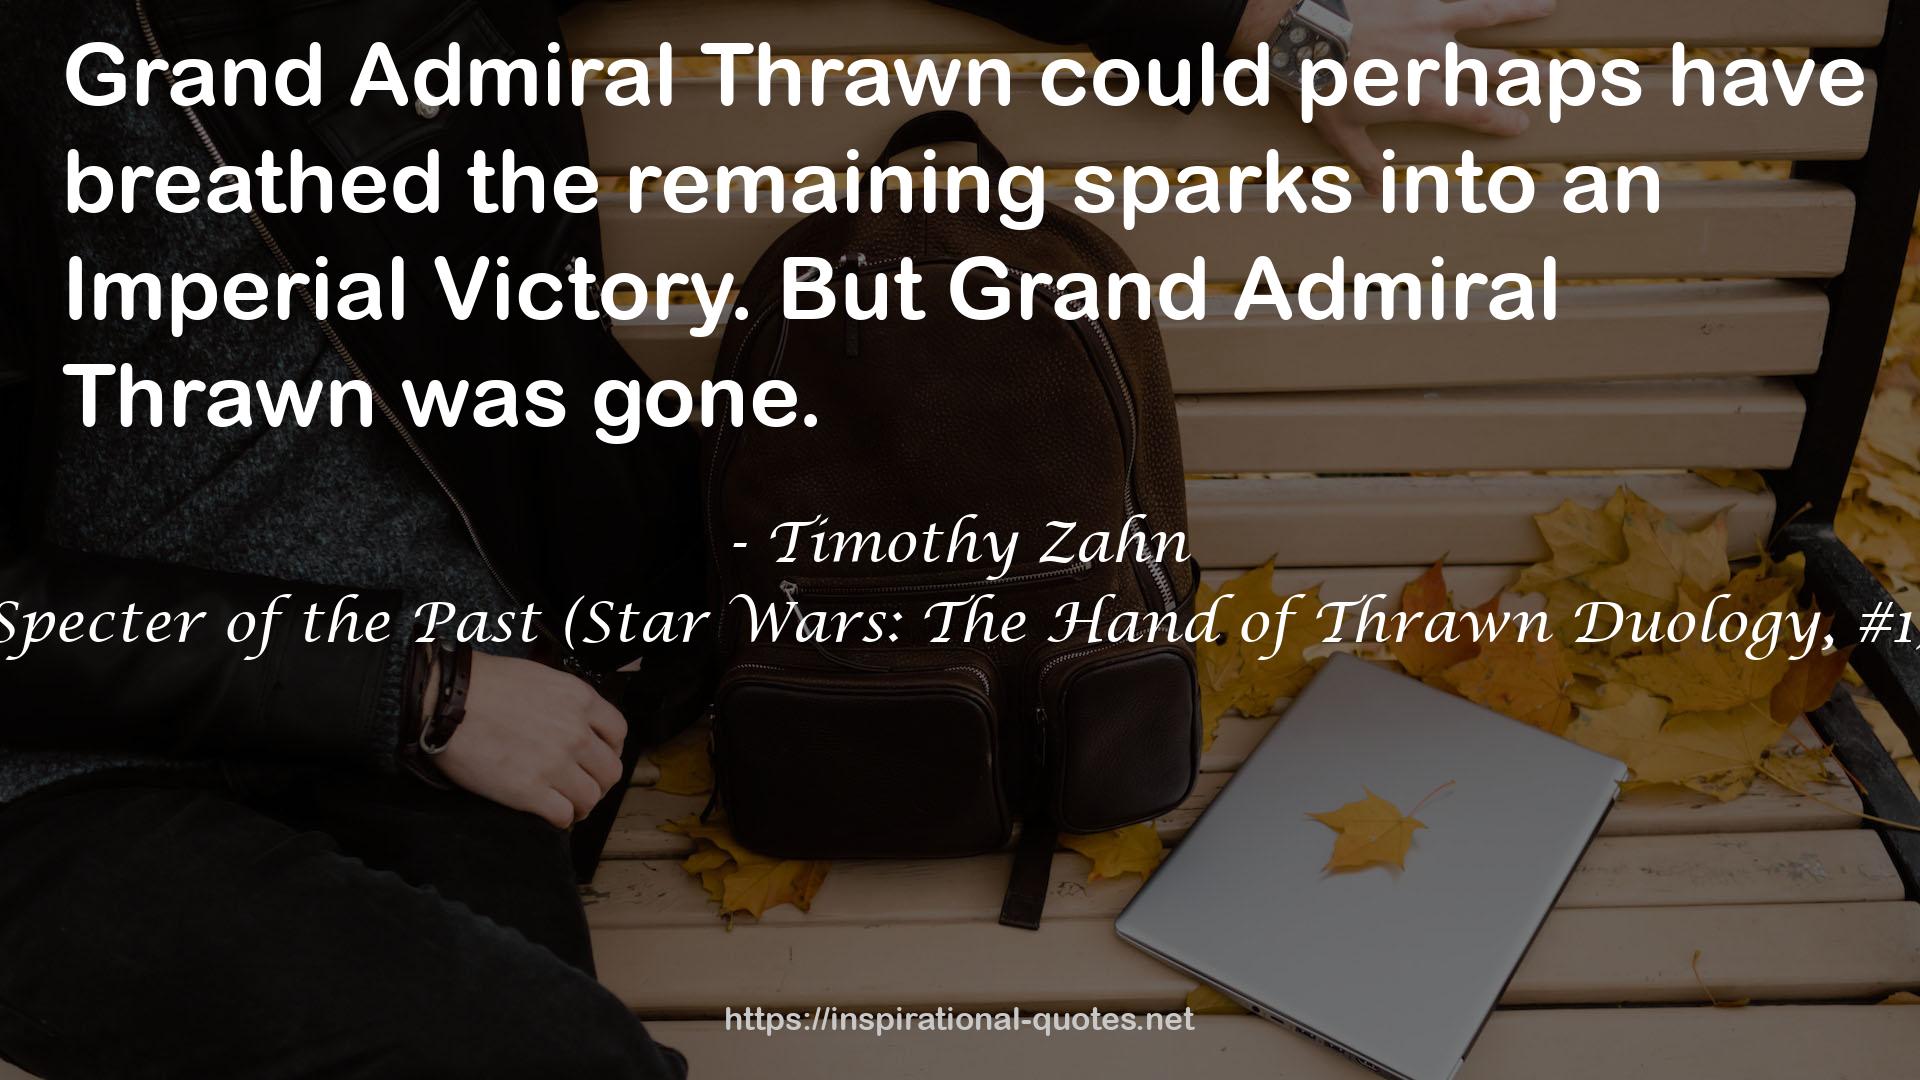 Specter of the Past (Star Wars: The Hand of Thrawn Duology, #1) QUOTES